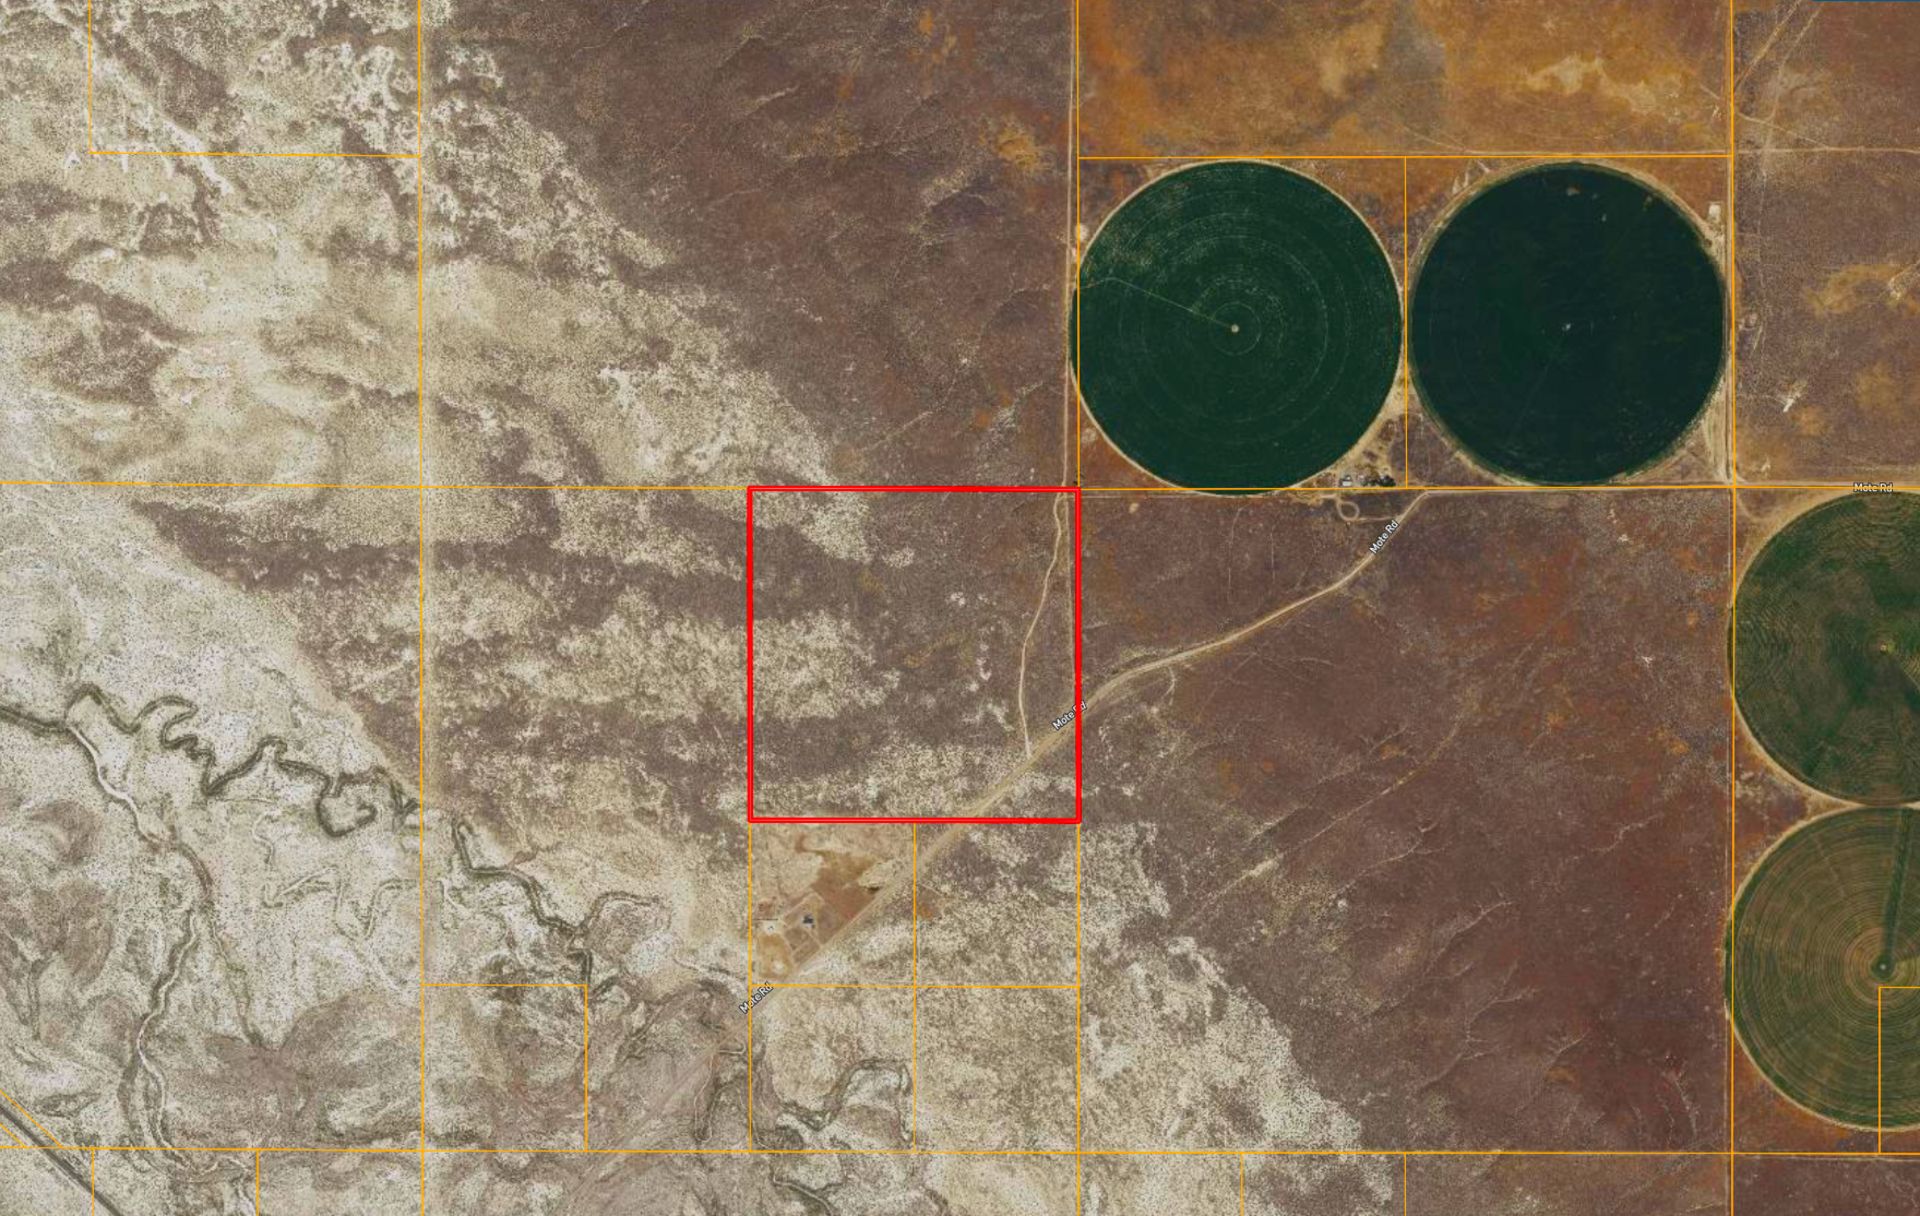 160 Acres Amidst Majestic Mountains in Lander County, Nevada! BIDDING IS PER ACRE! - Image 9 of 15